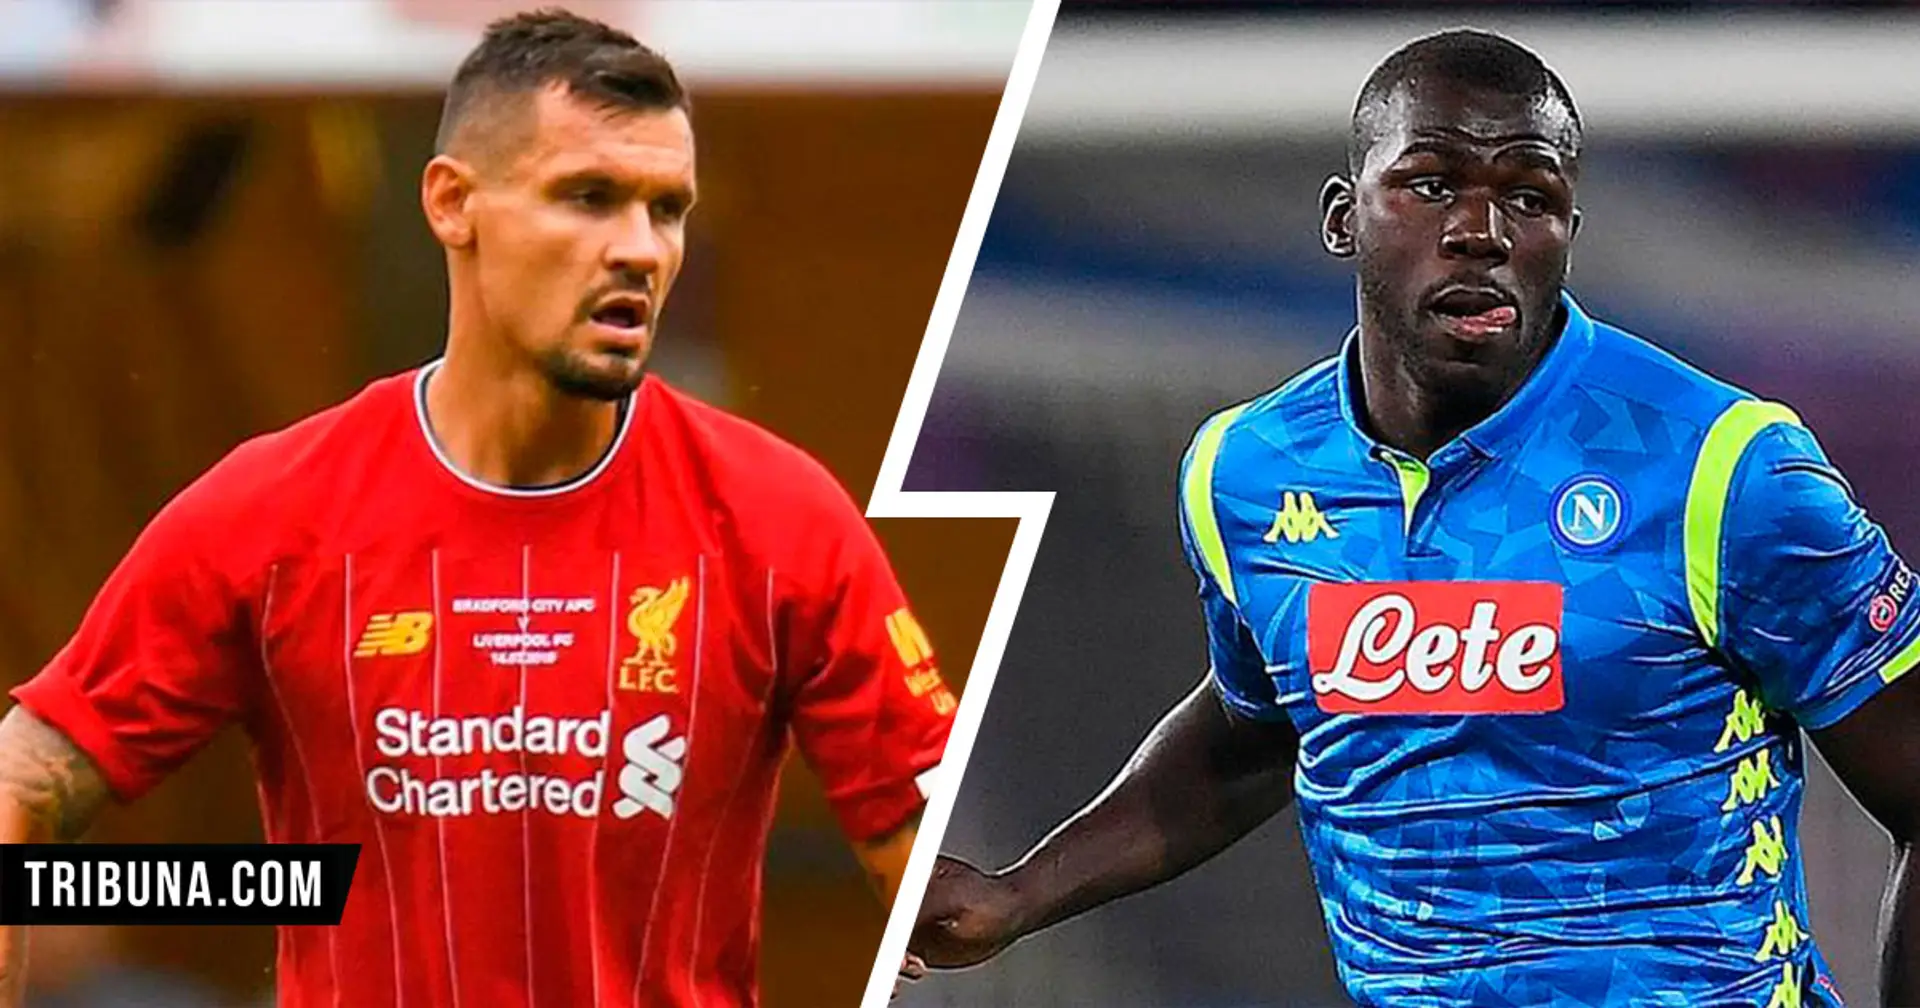 Liverpool reportedly plan to offer Lovren to Napoli in order to lower price for Koulibaly